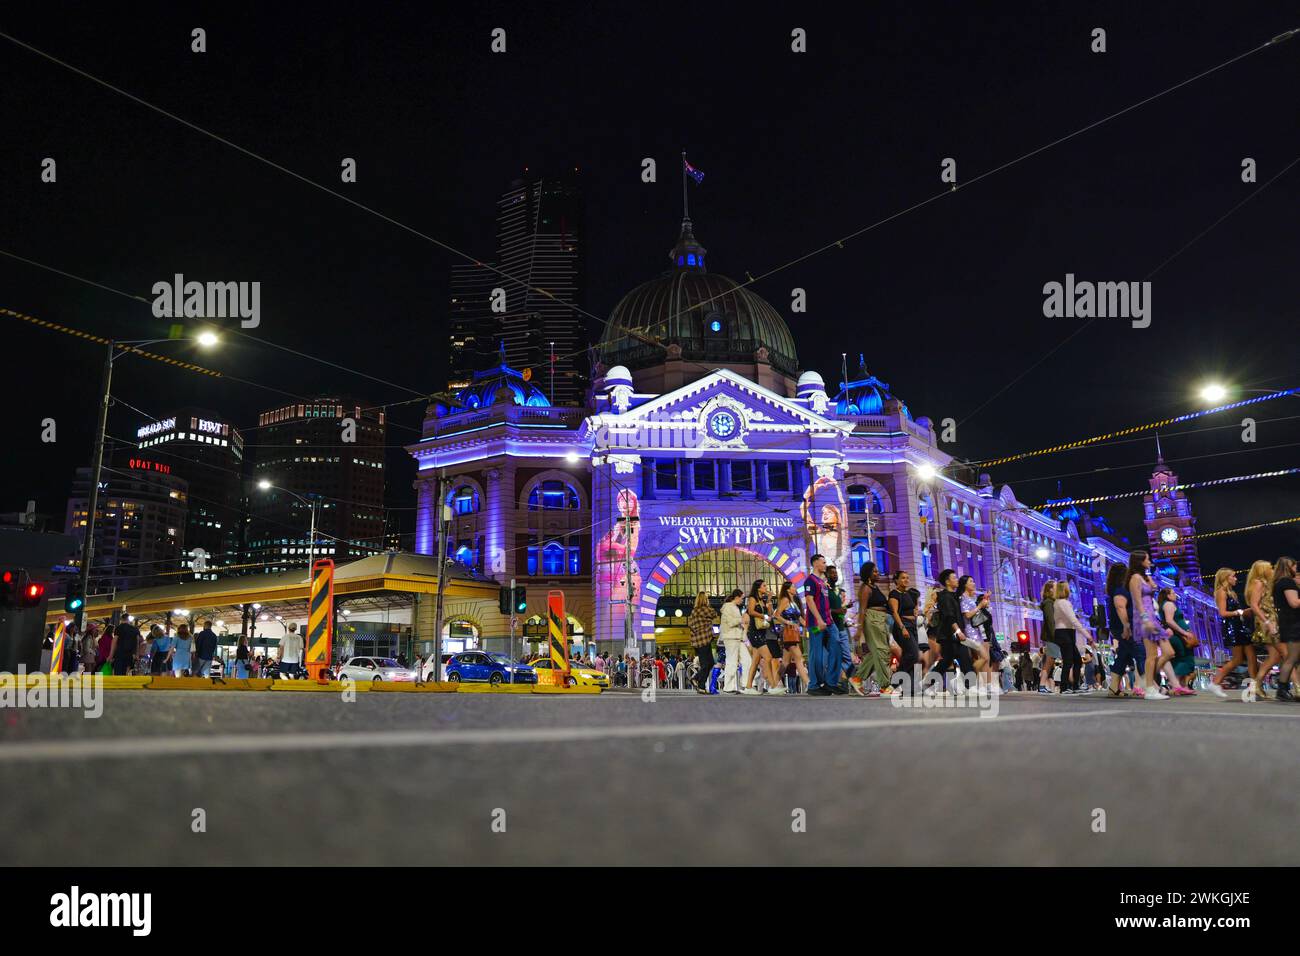 A Taylor Swift projection is shown on Flinders Street Station to greet fans attending 3 record breaking shows at the MCG. Stock Photo